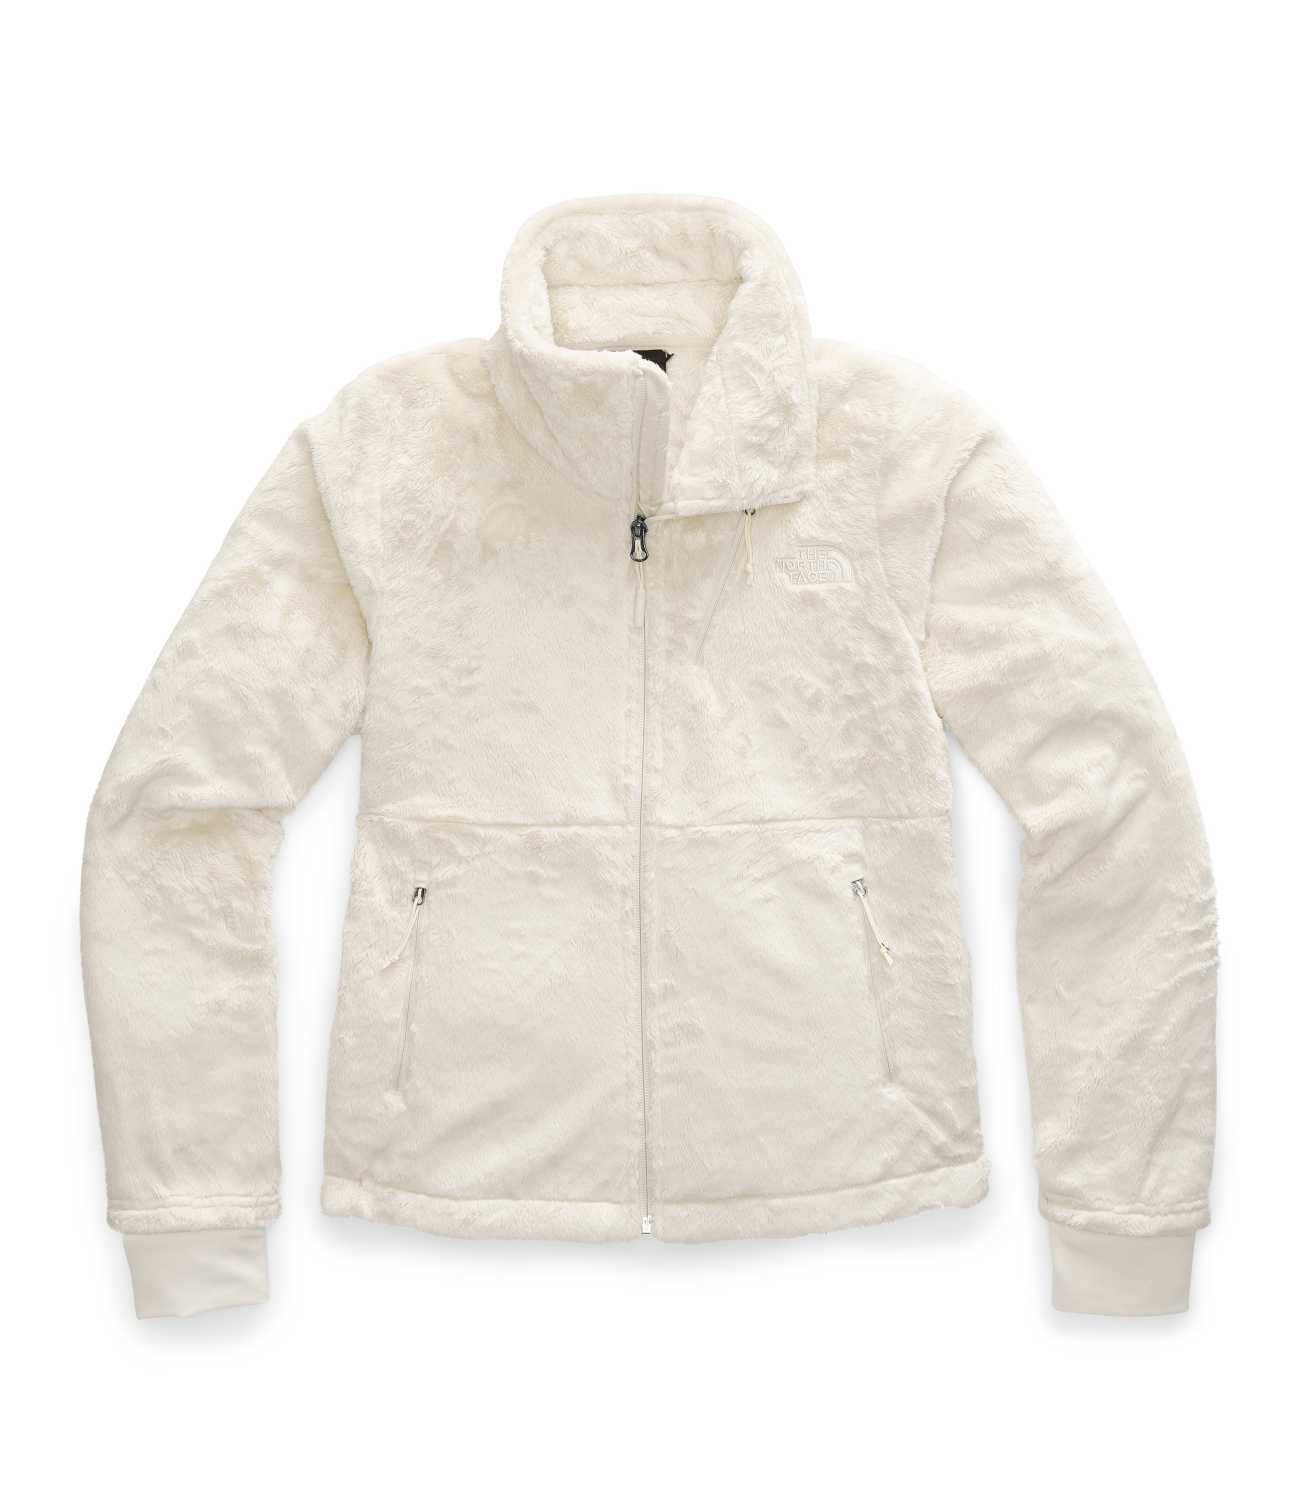 WOMEN'S OSITO FLOW JACKET, The North Face